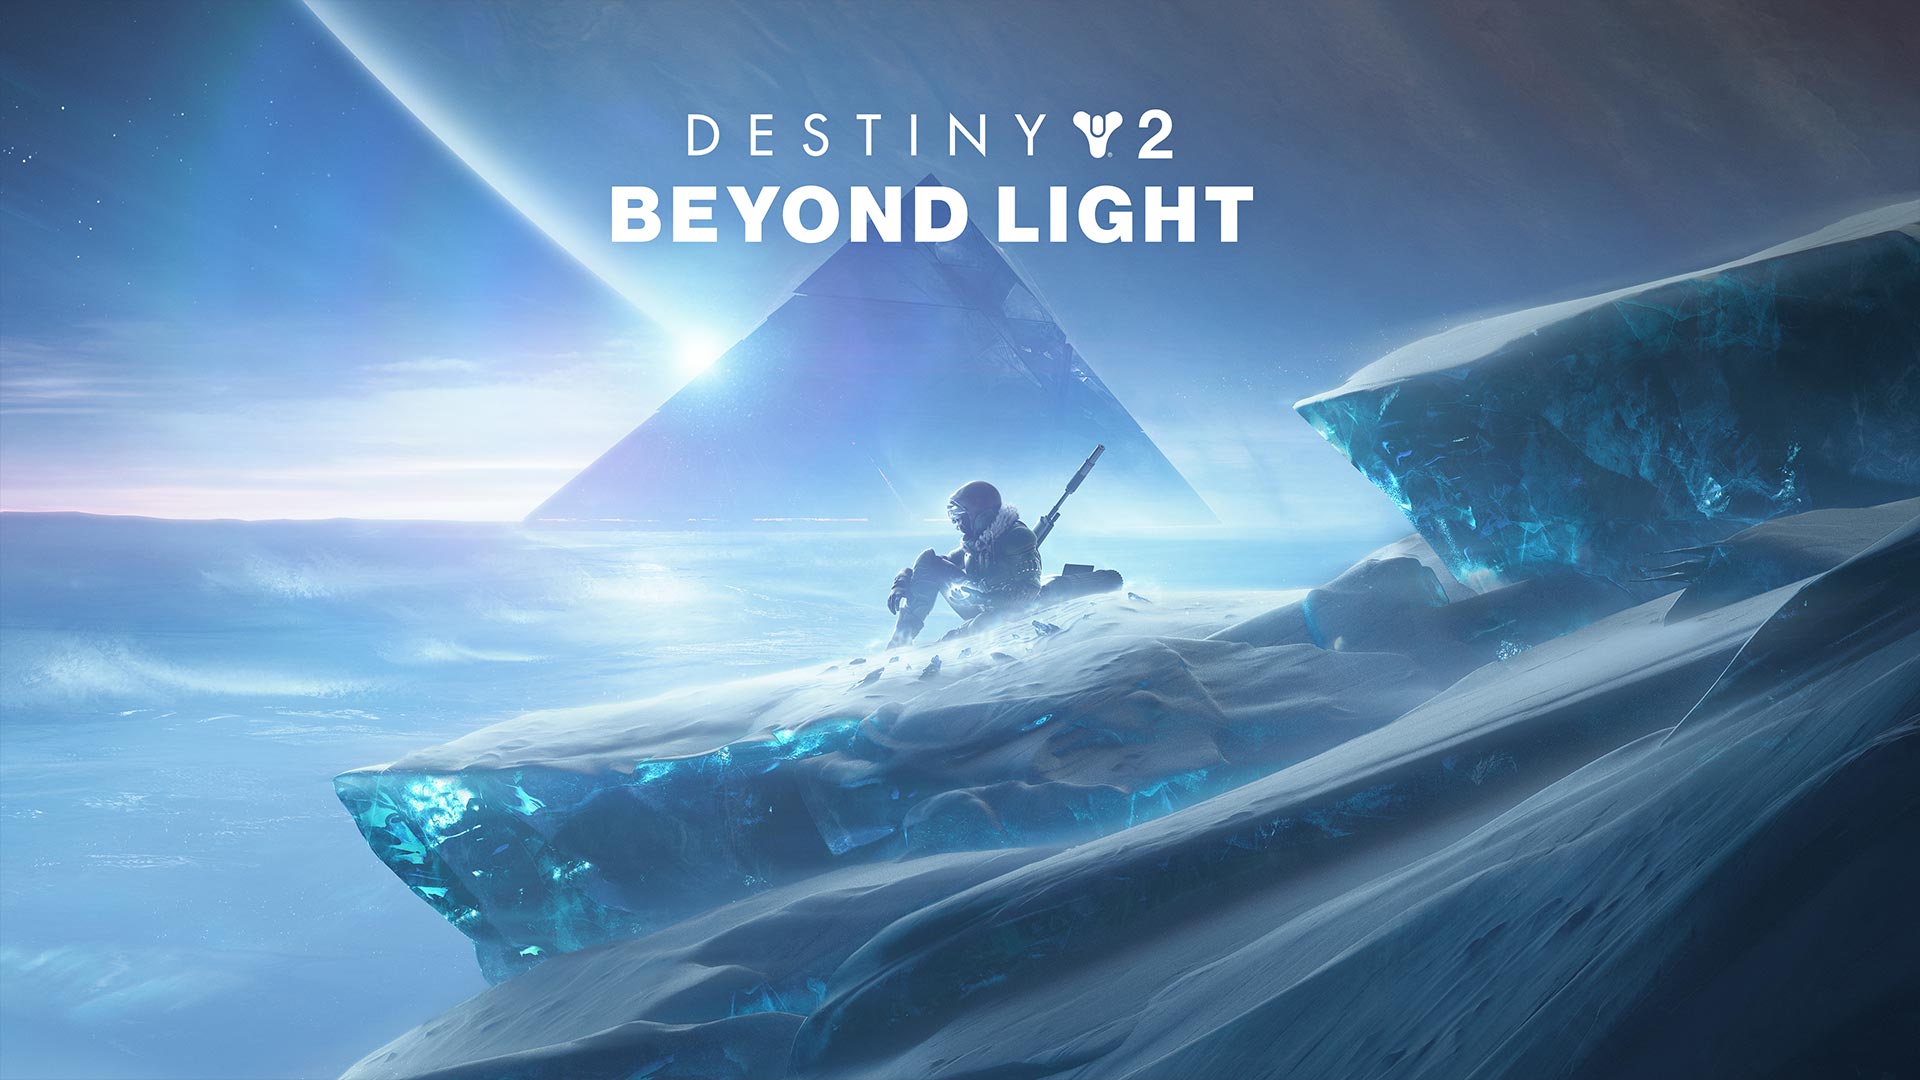 Everything we know about Destiny 2 Beyond Light so far